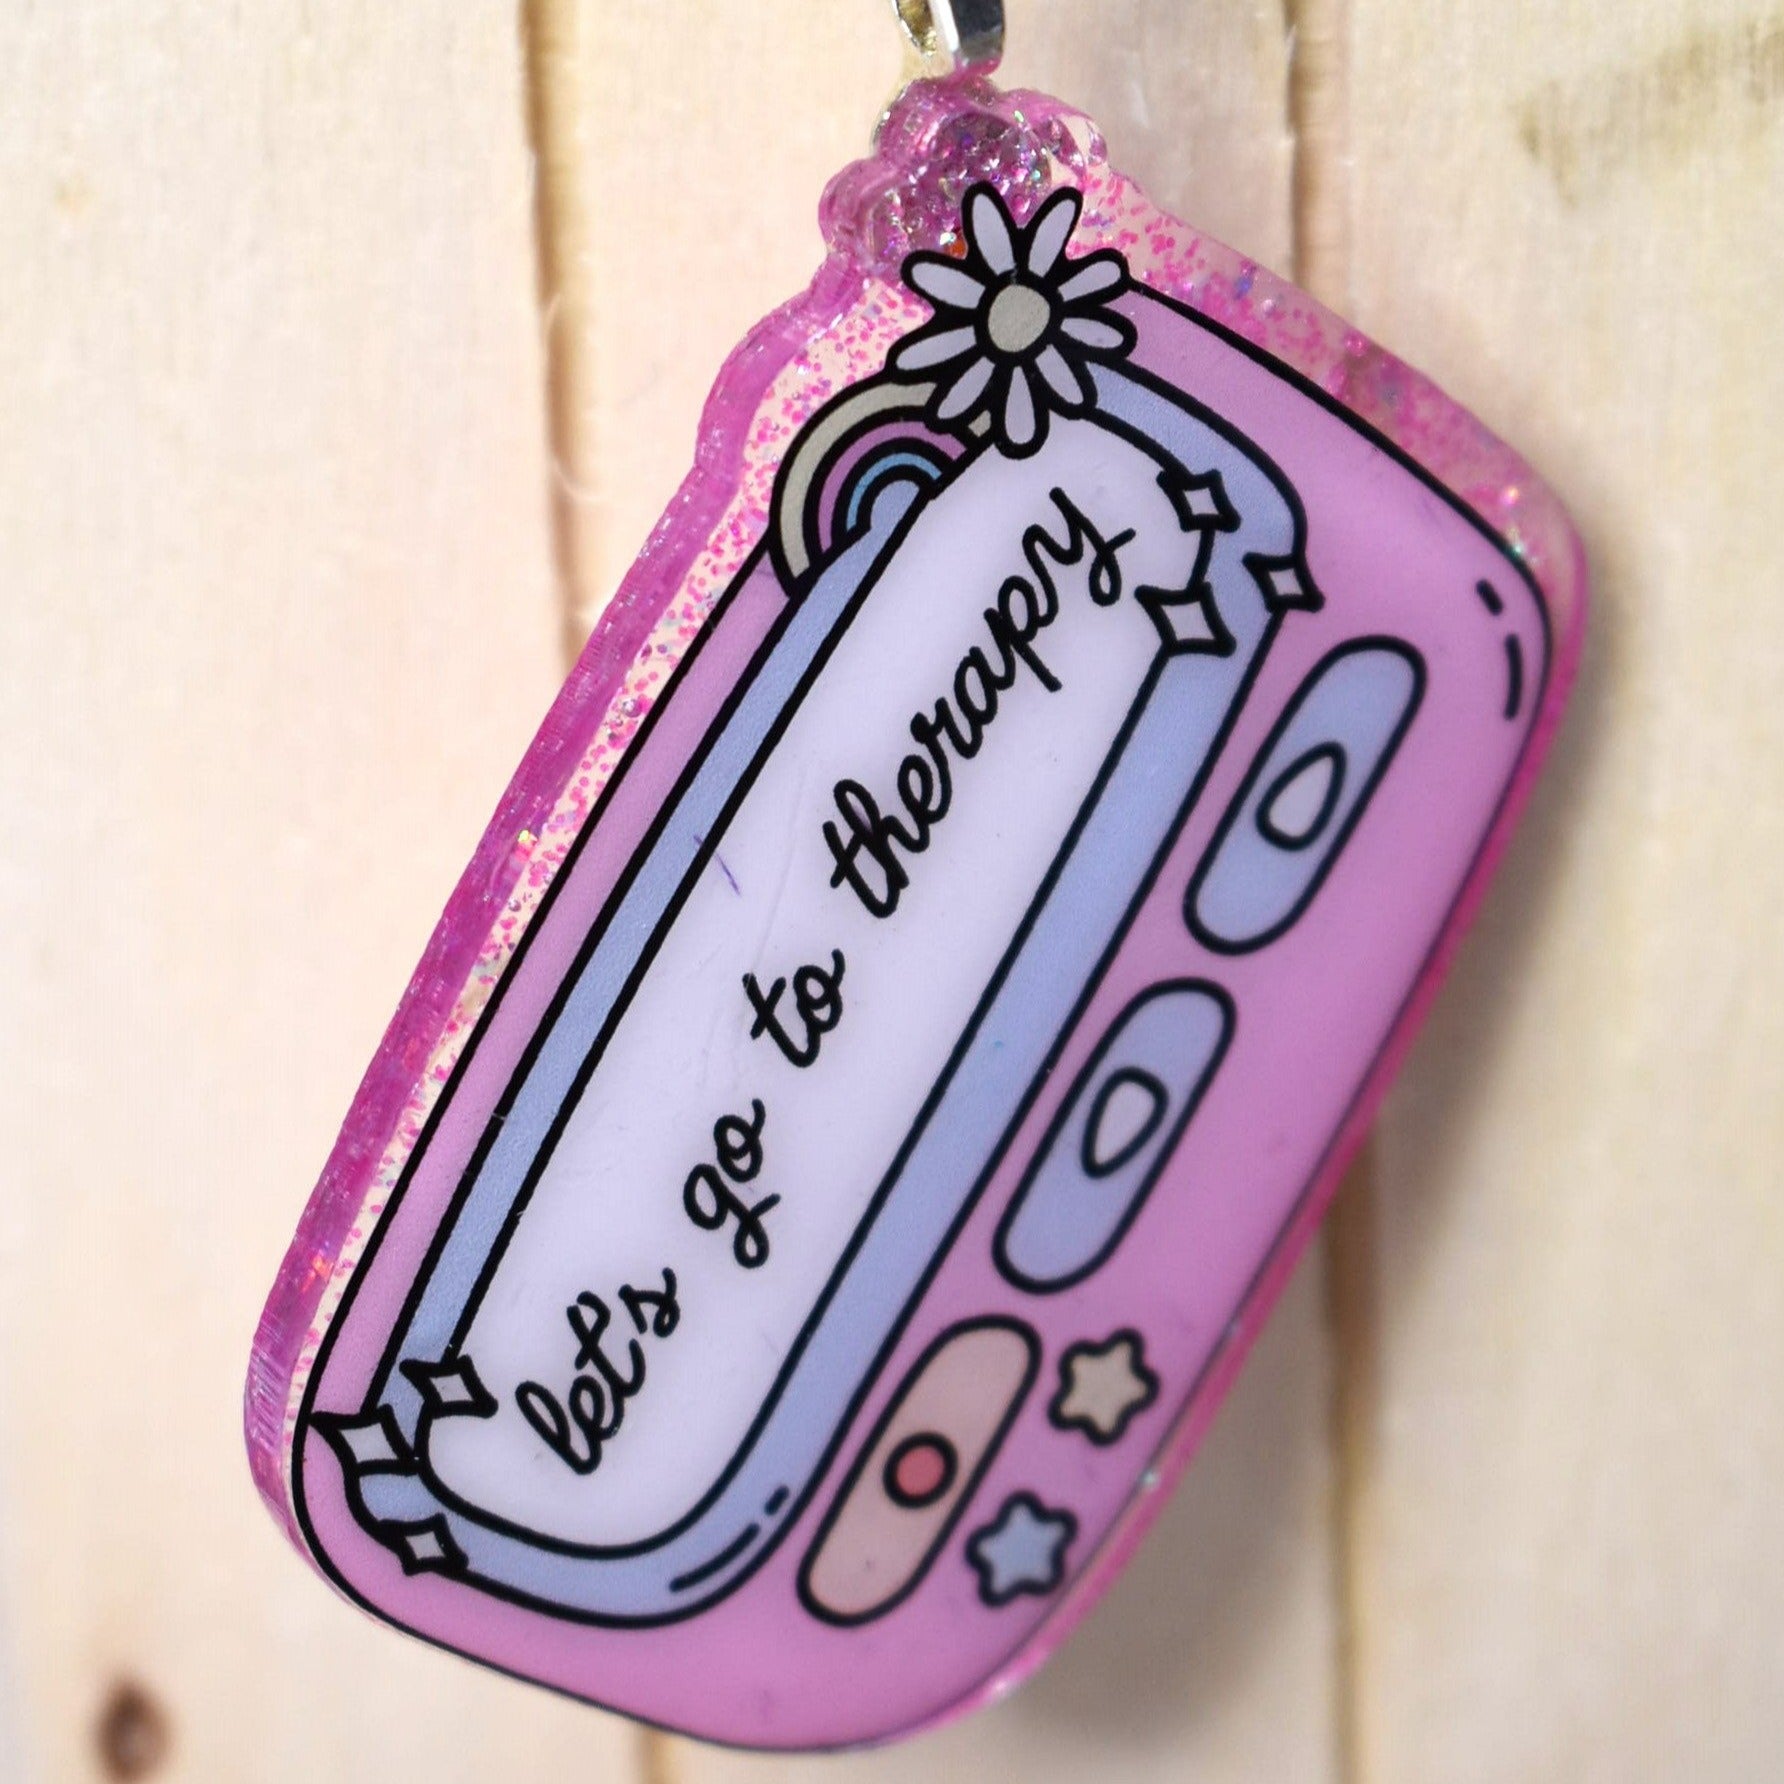 Keychain Lets Go To Therapy is crafted from durable acrylic resin and comes in pink or purple. Perfect for those in need of some therapy on the go.